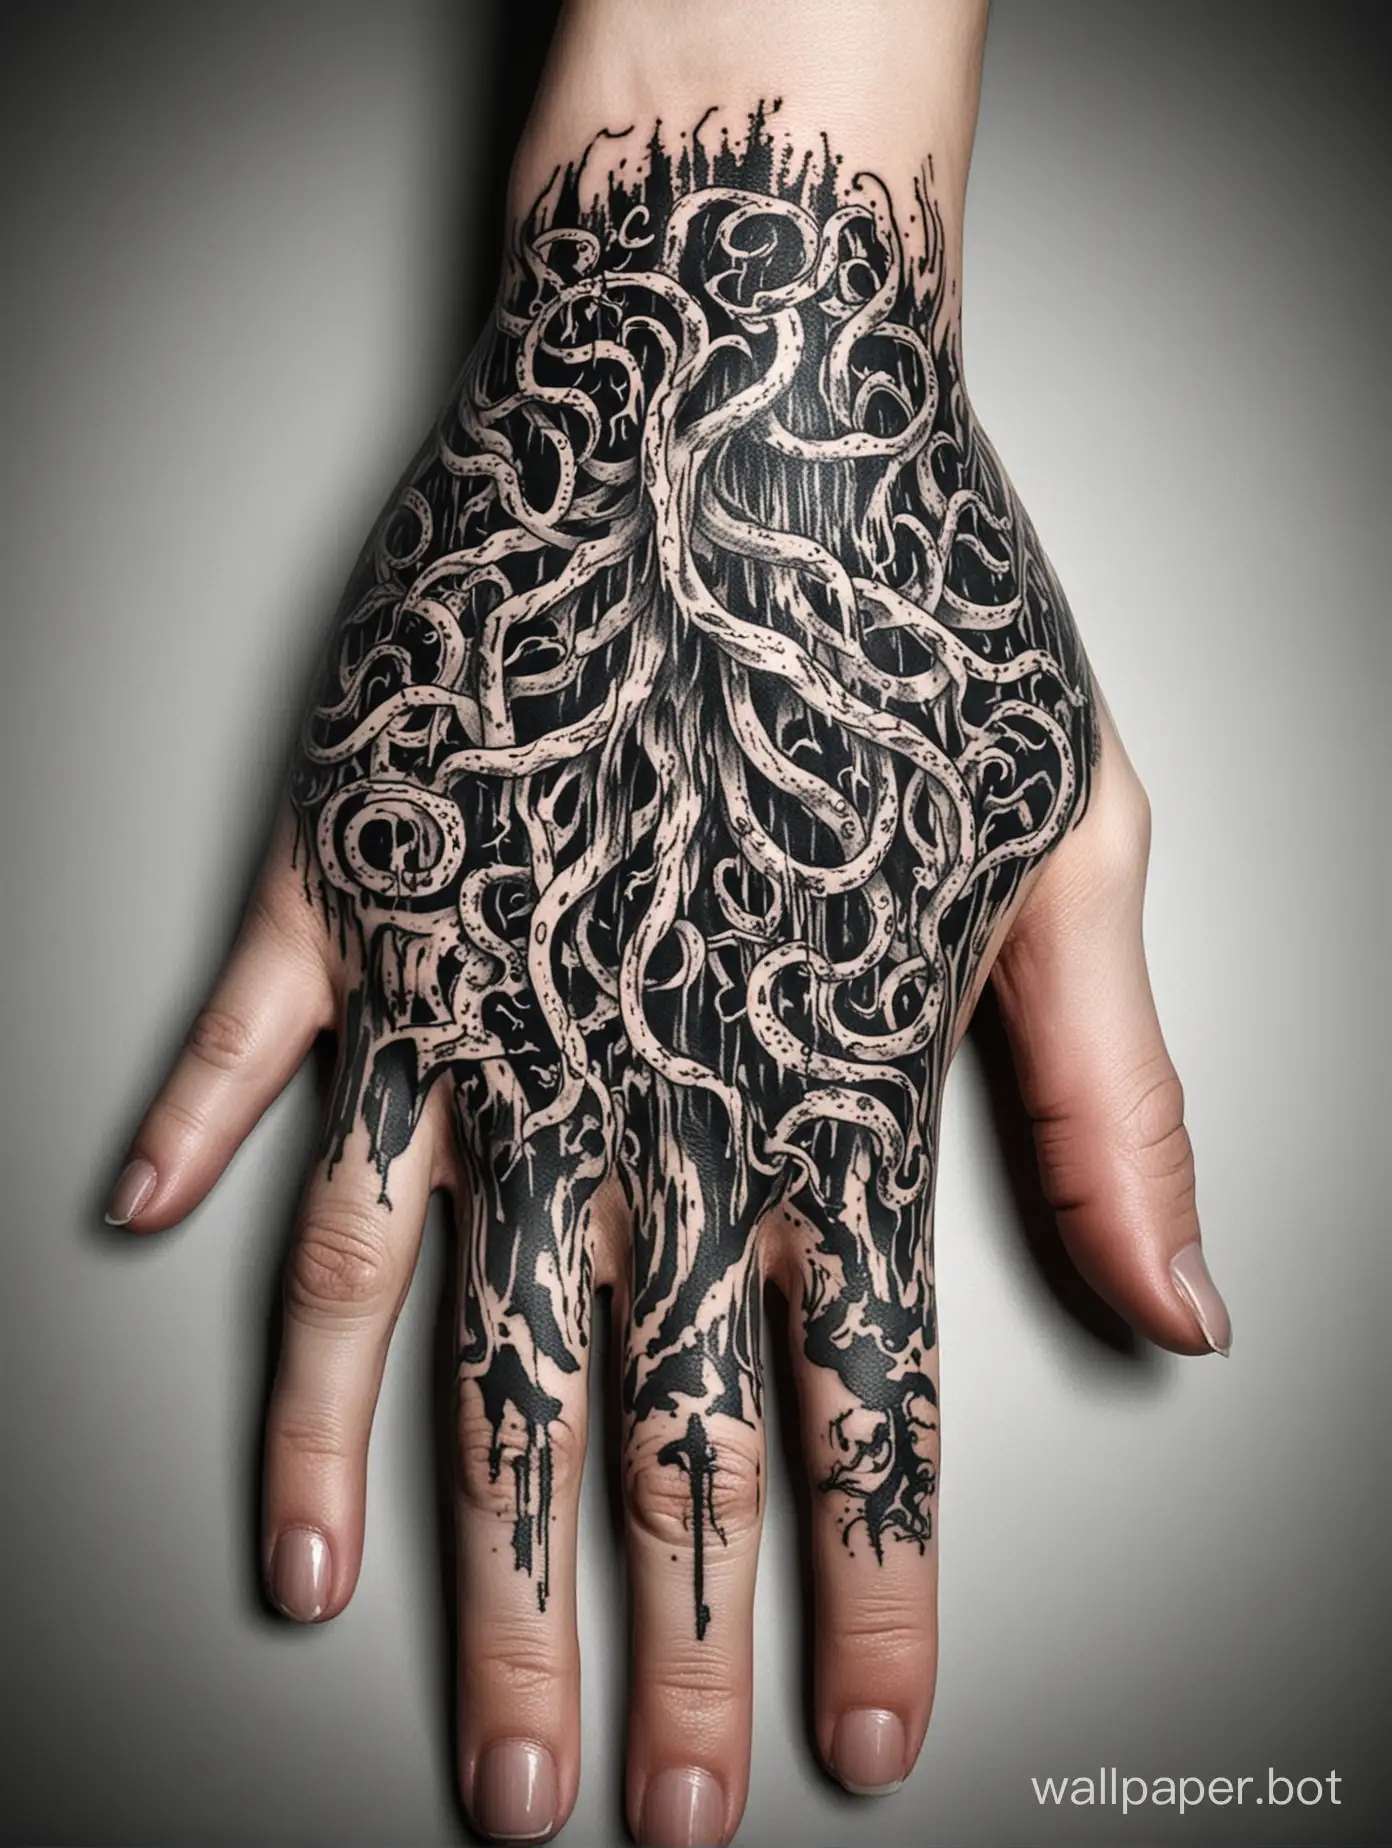 Chaotic-Circular-Ornament-Hand-Tattoo-Design-with-Dripping-Tentacles-and-Lightning-Waves